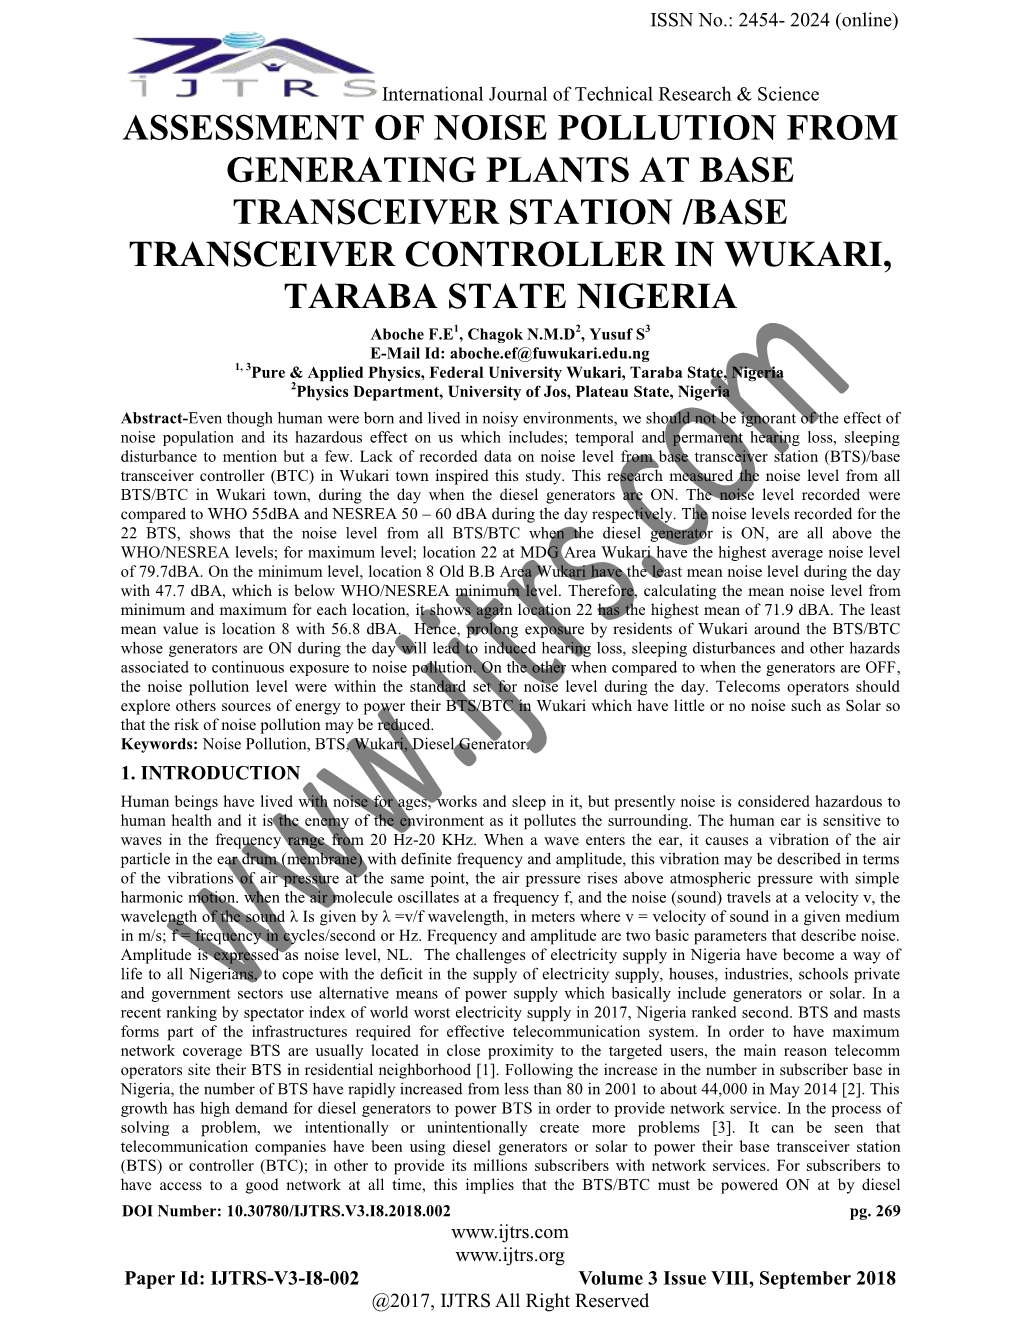 Assessment of Noise Pollution from Generating Plants at Base Transceiver Station /Base Transceiver Controller in Wukari, Taraba State Nigeria